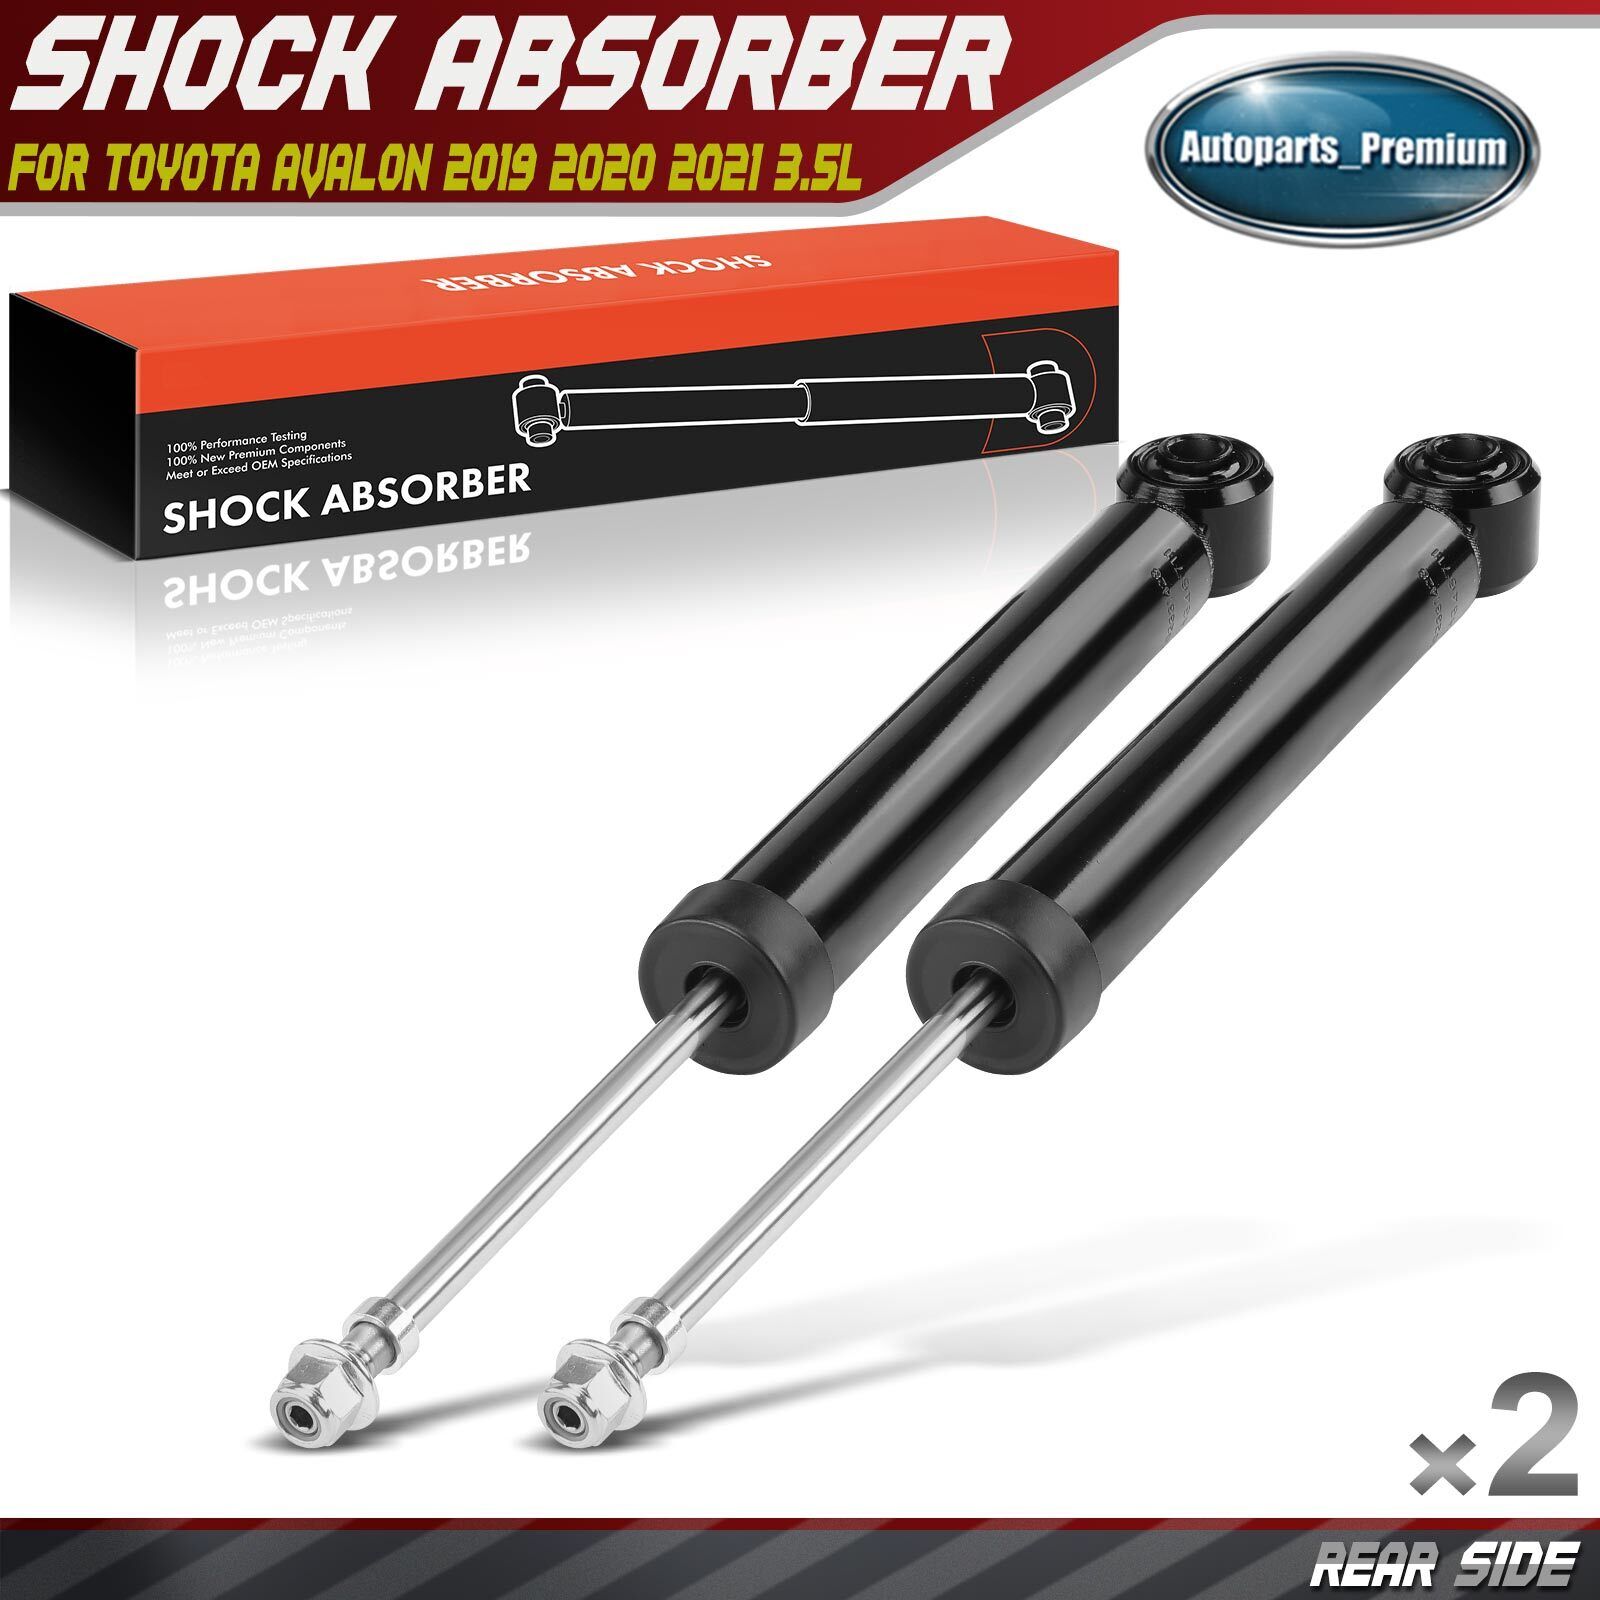 2x Rear Suspension Shock Absorber for Toyota Avalon 2019 2020 2021 3.5L Limited